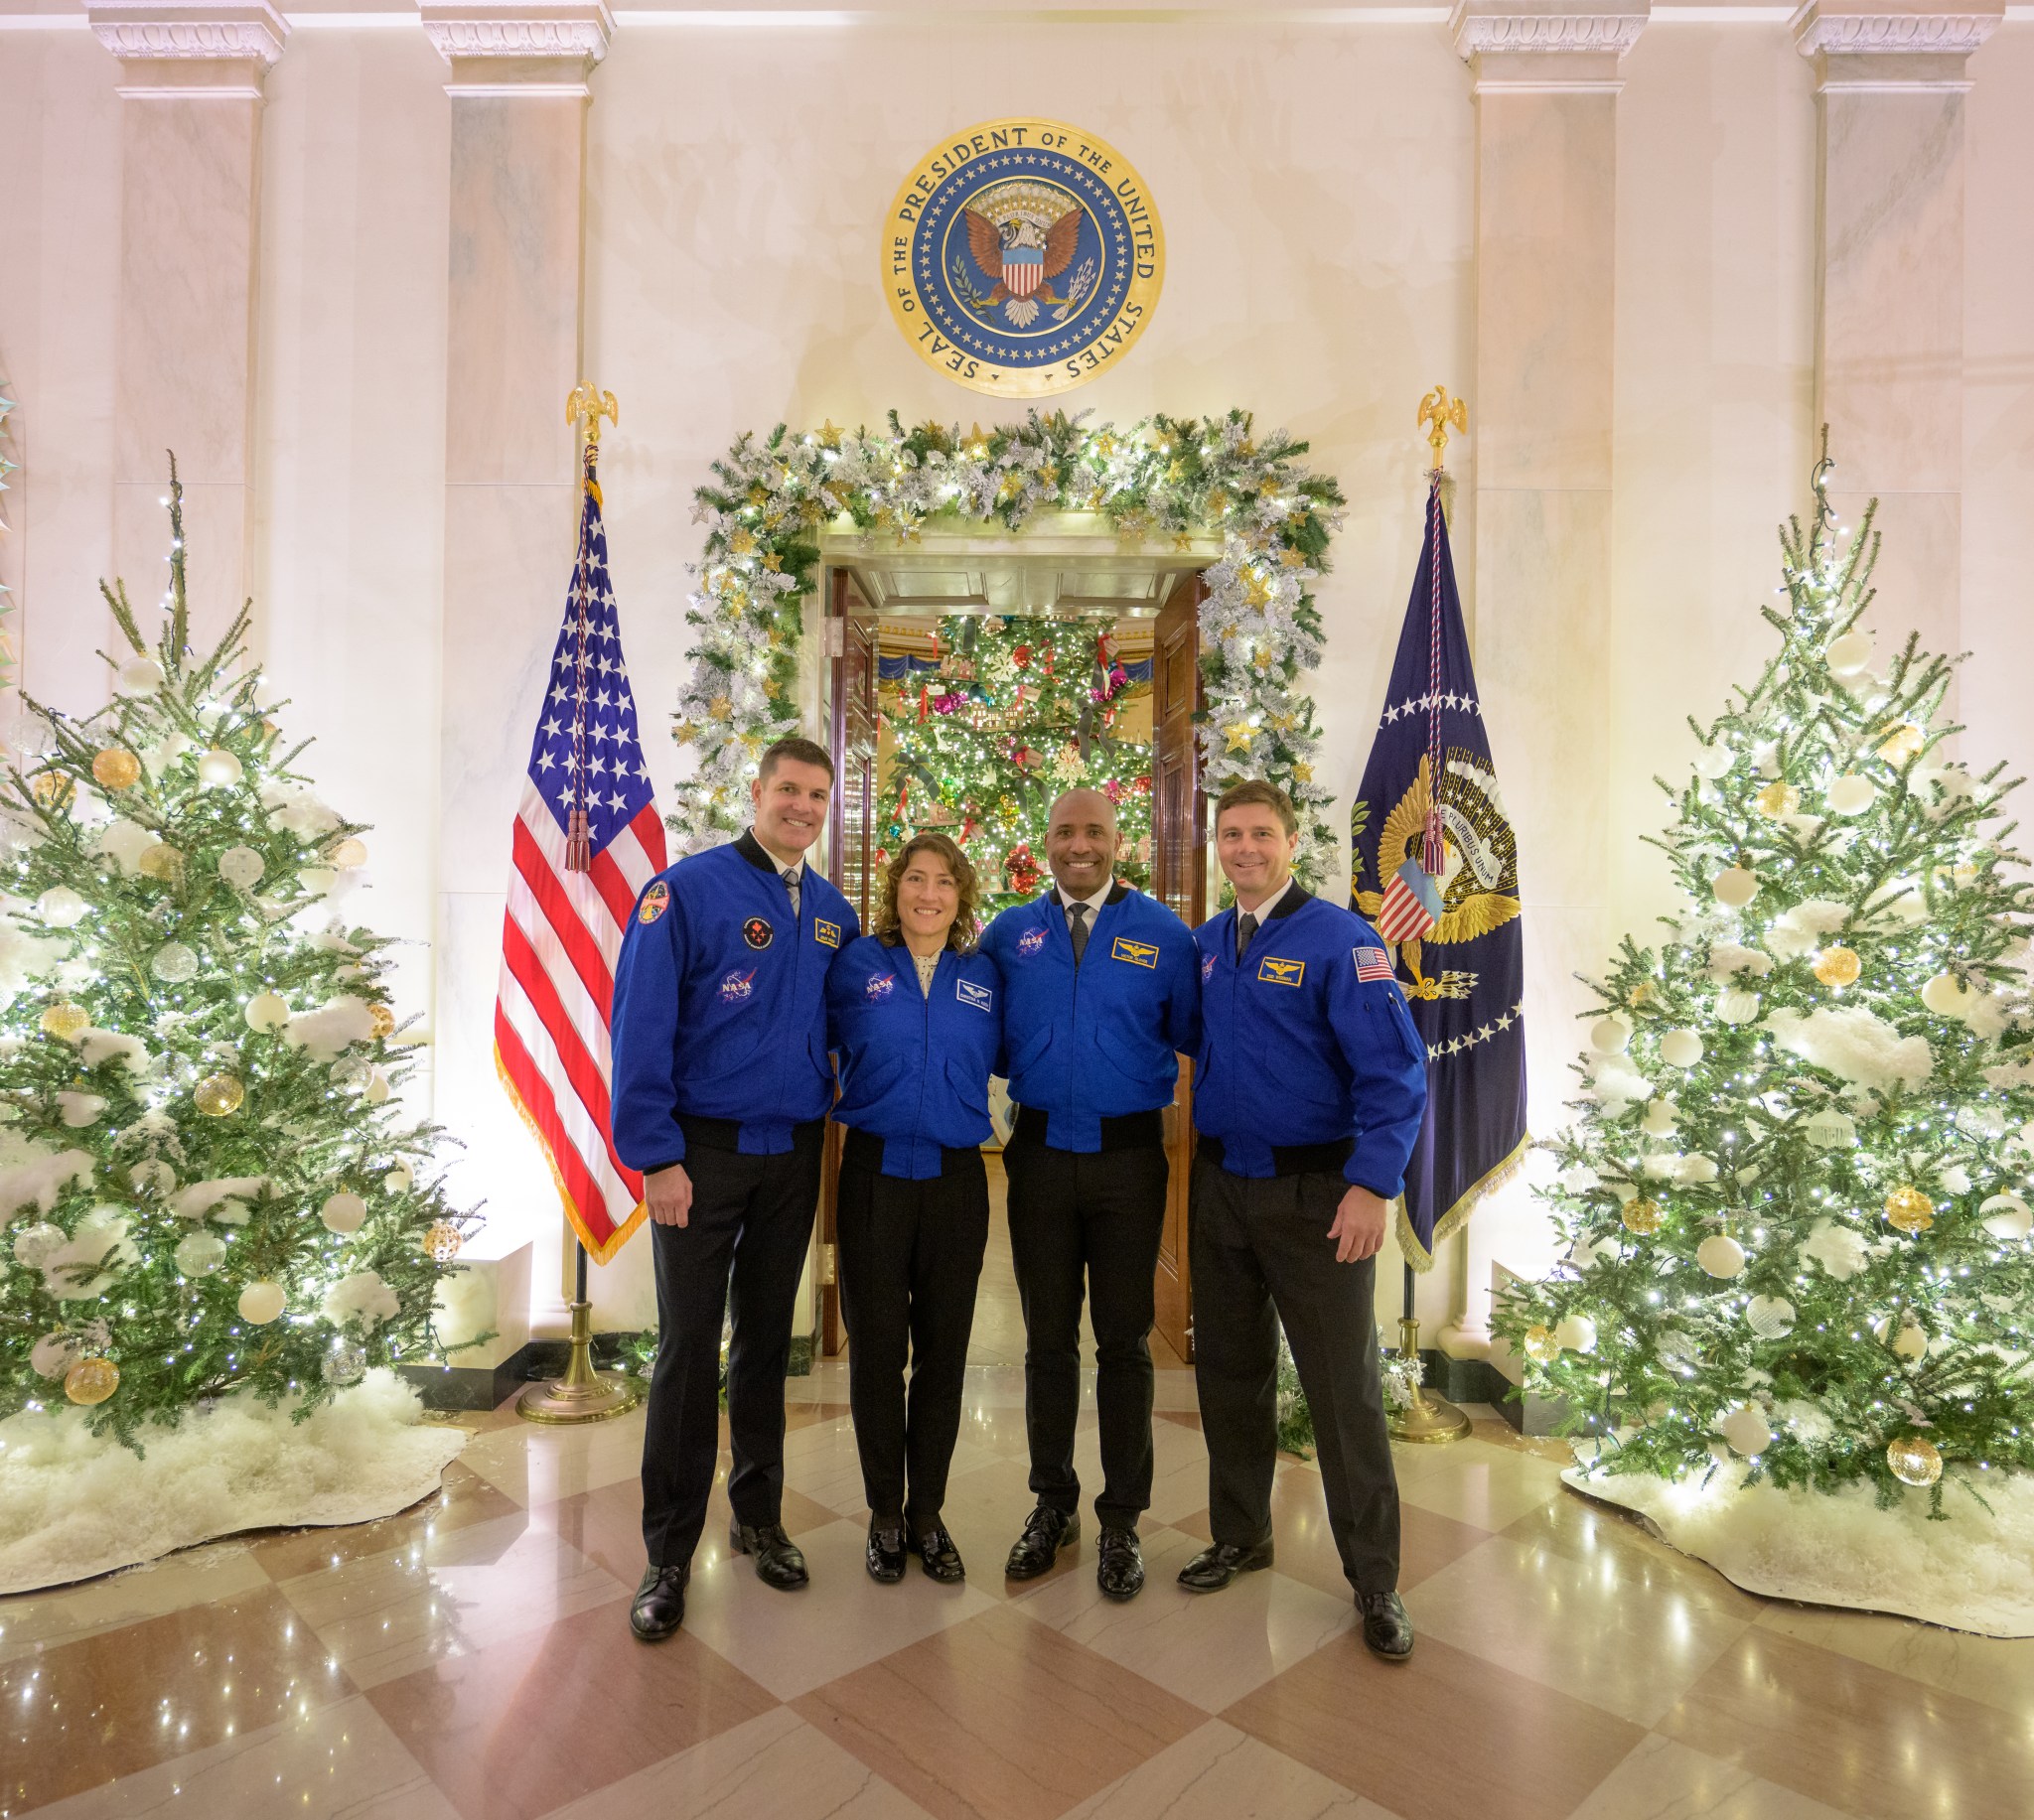 Four astronauts, wearing blue jackets and black pants, pose for a photo at the White House in front of decorations like trees, wreaths, and boughs. The astronauts, members of the Artemis II mission, have their arms around each other's shoulders. Behind them are two flags, and a seal high on the wall that reads 